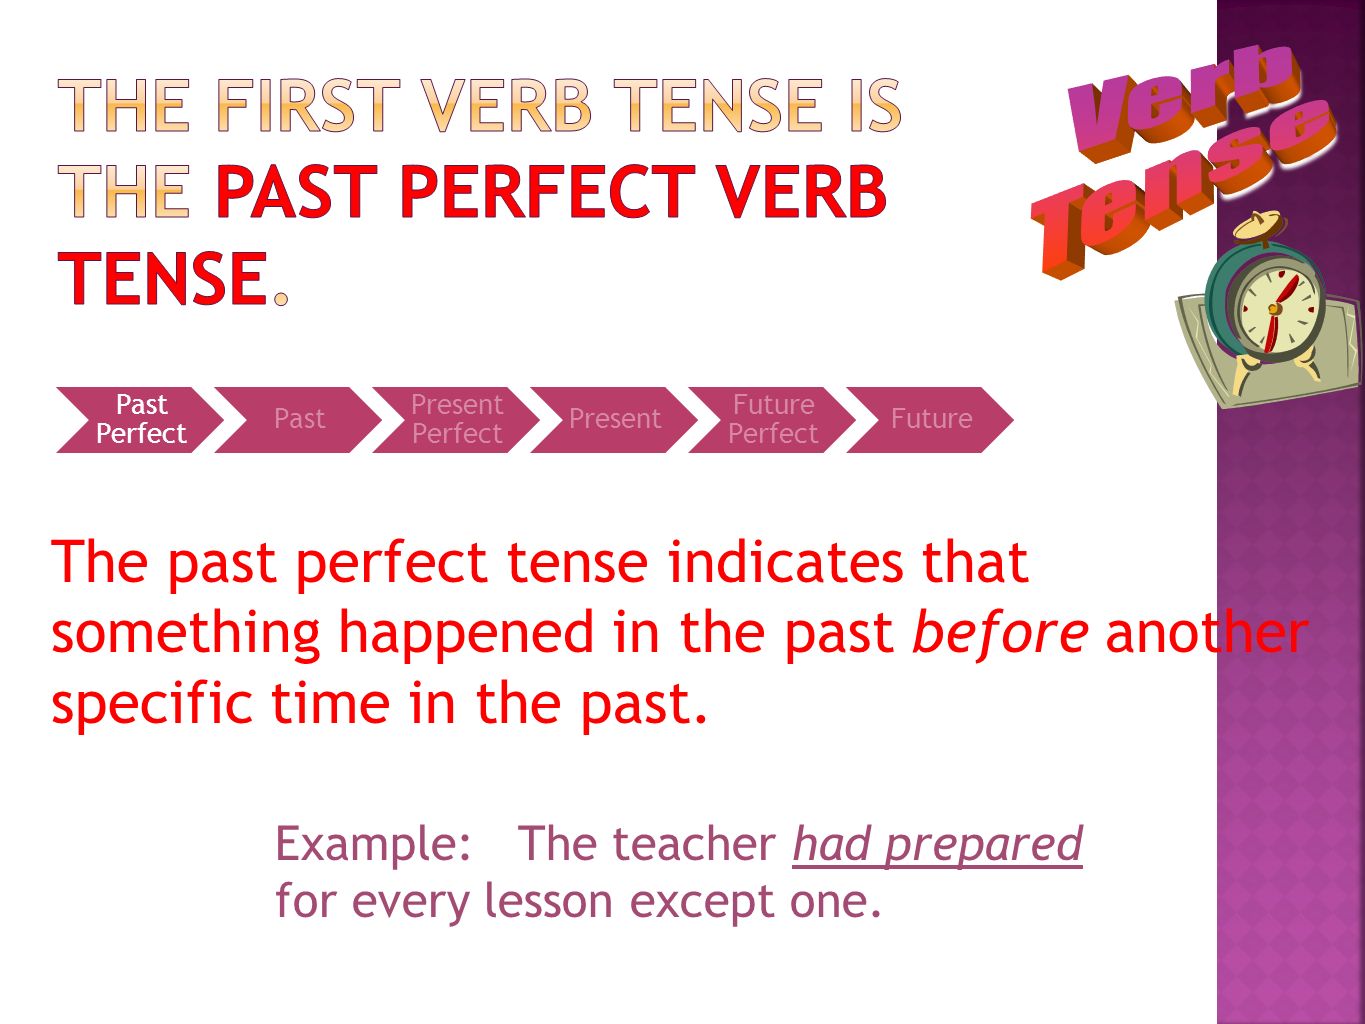 The first verb tense is the past perfect verb tense.